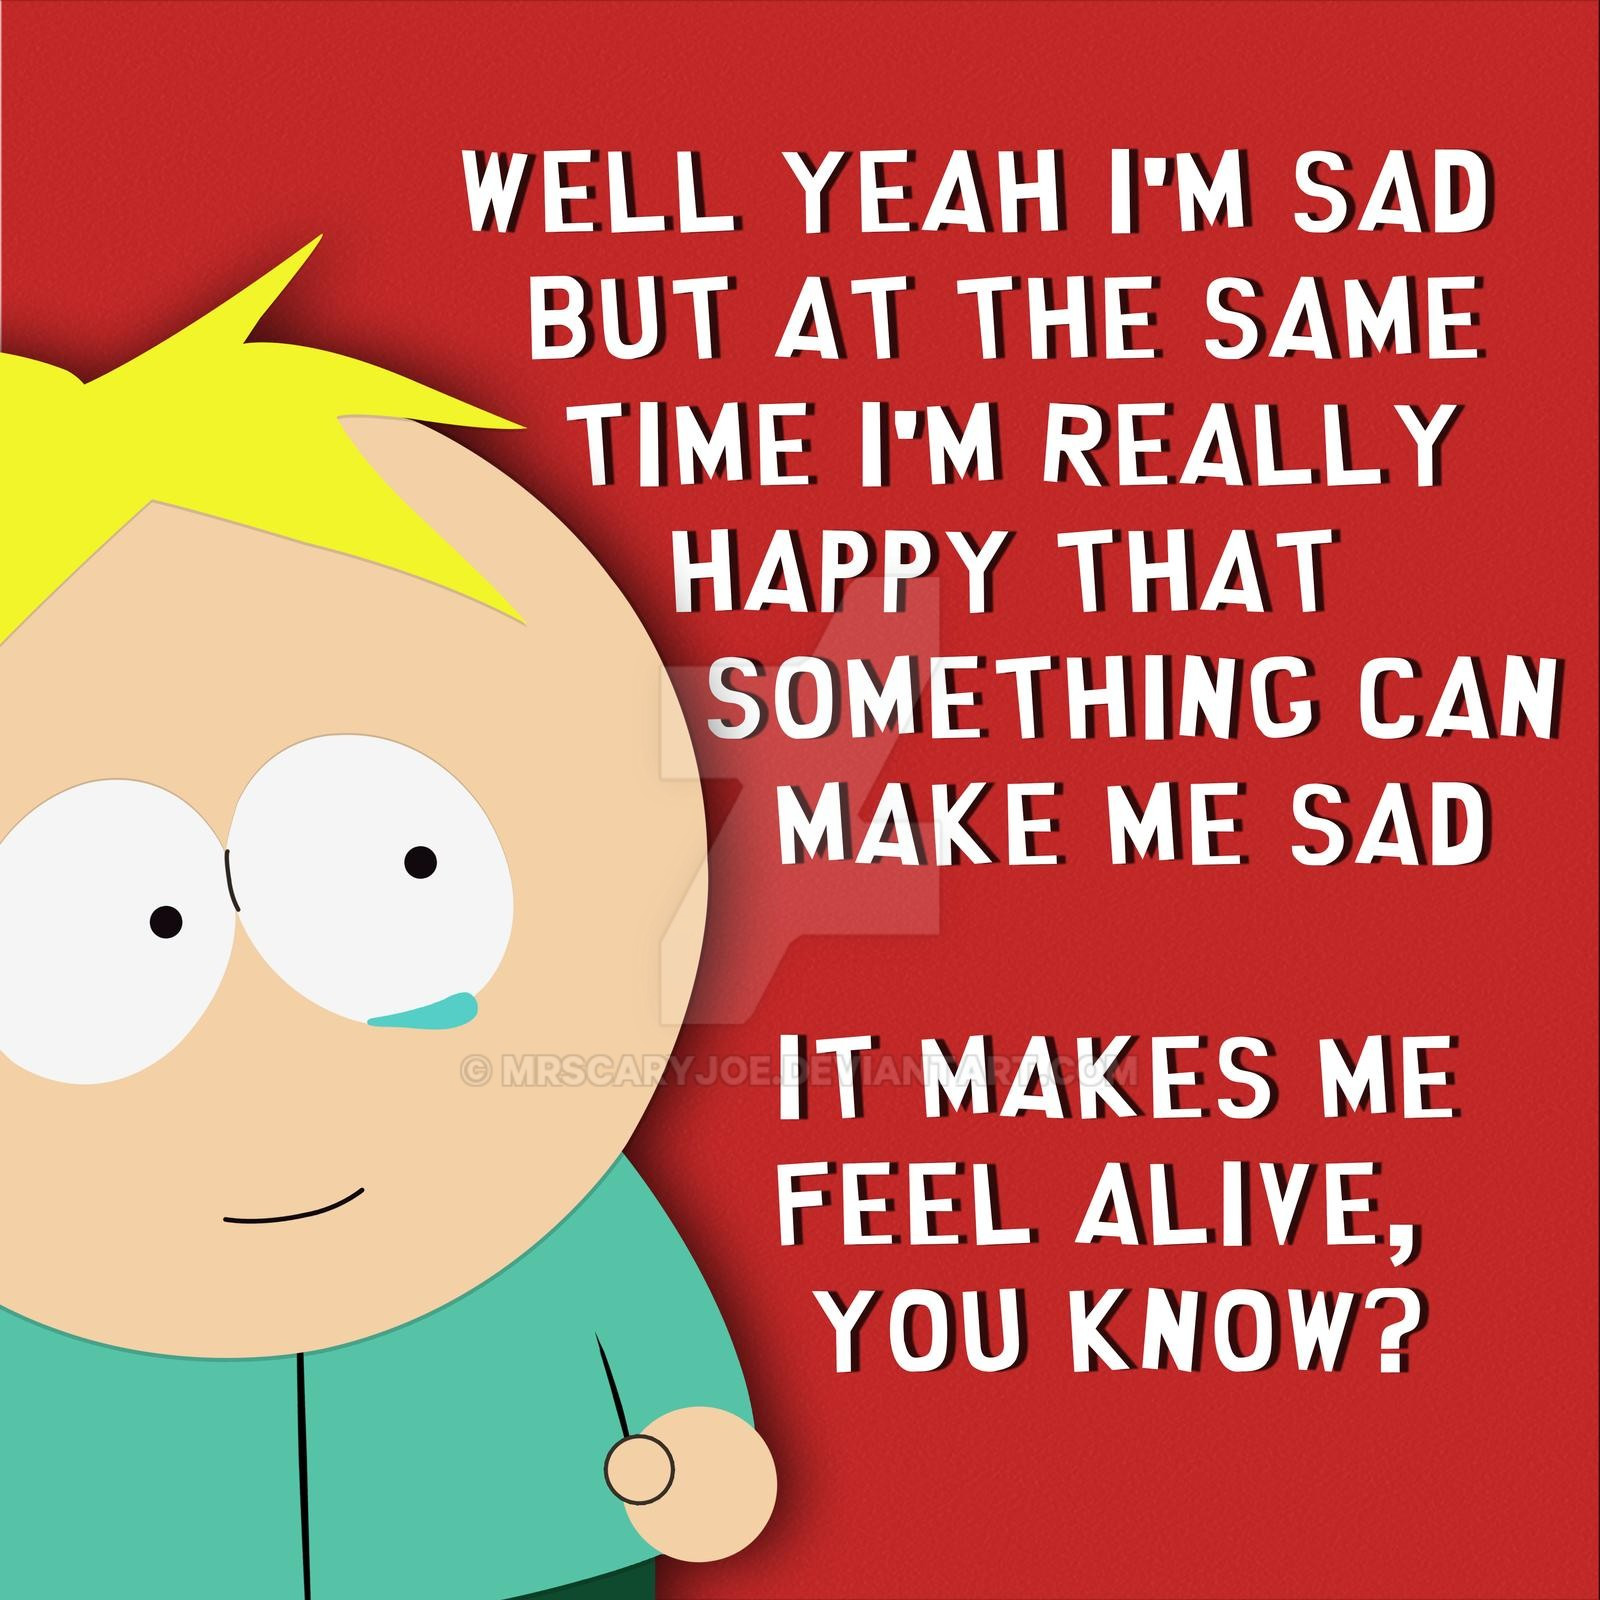 Butters Beautiful Sadness Quote
 South Park Butters Quote by MrScaryJoe on DeviantArt